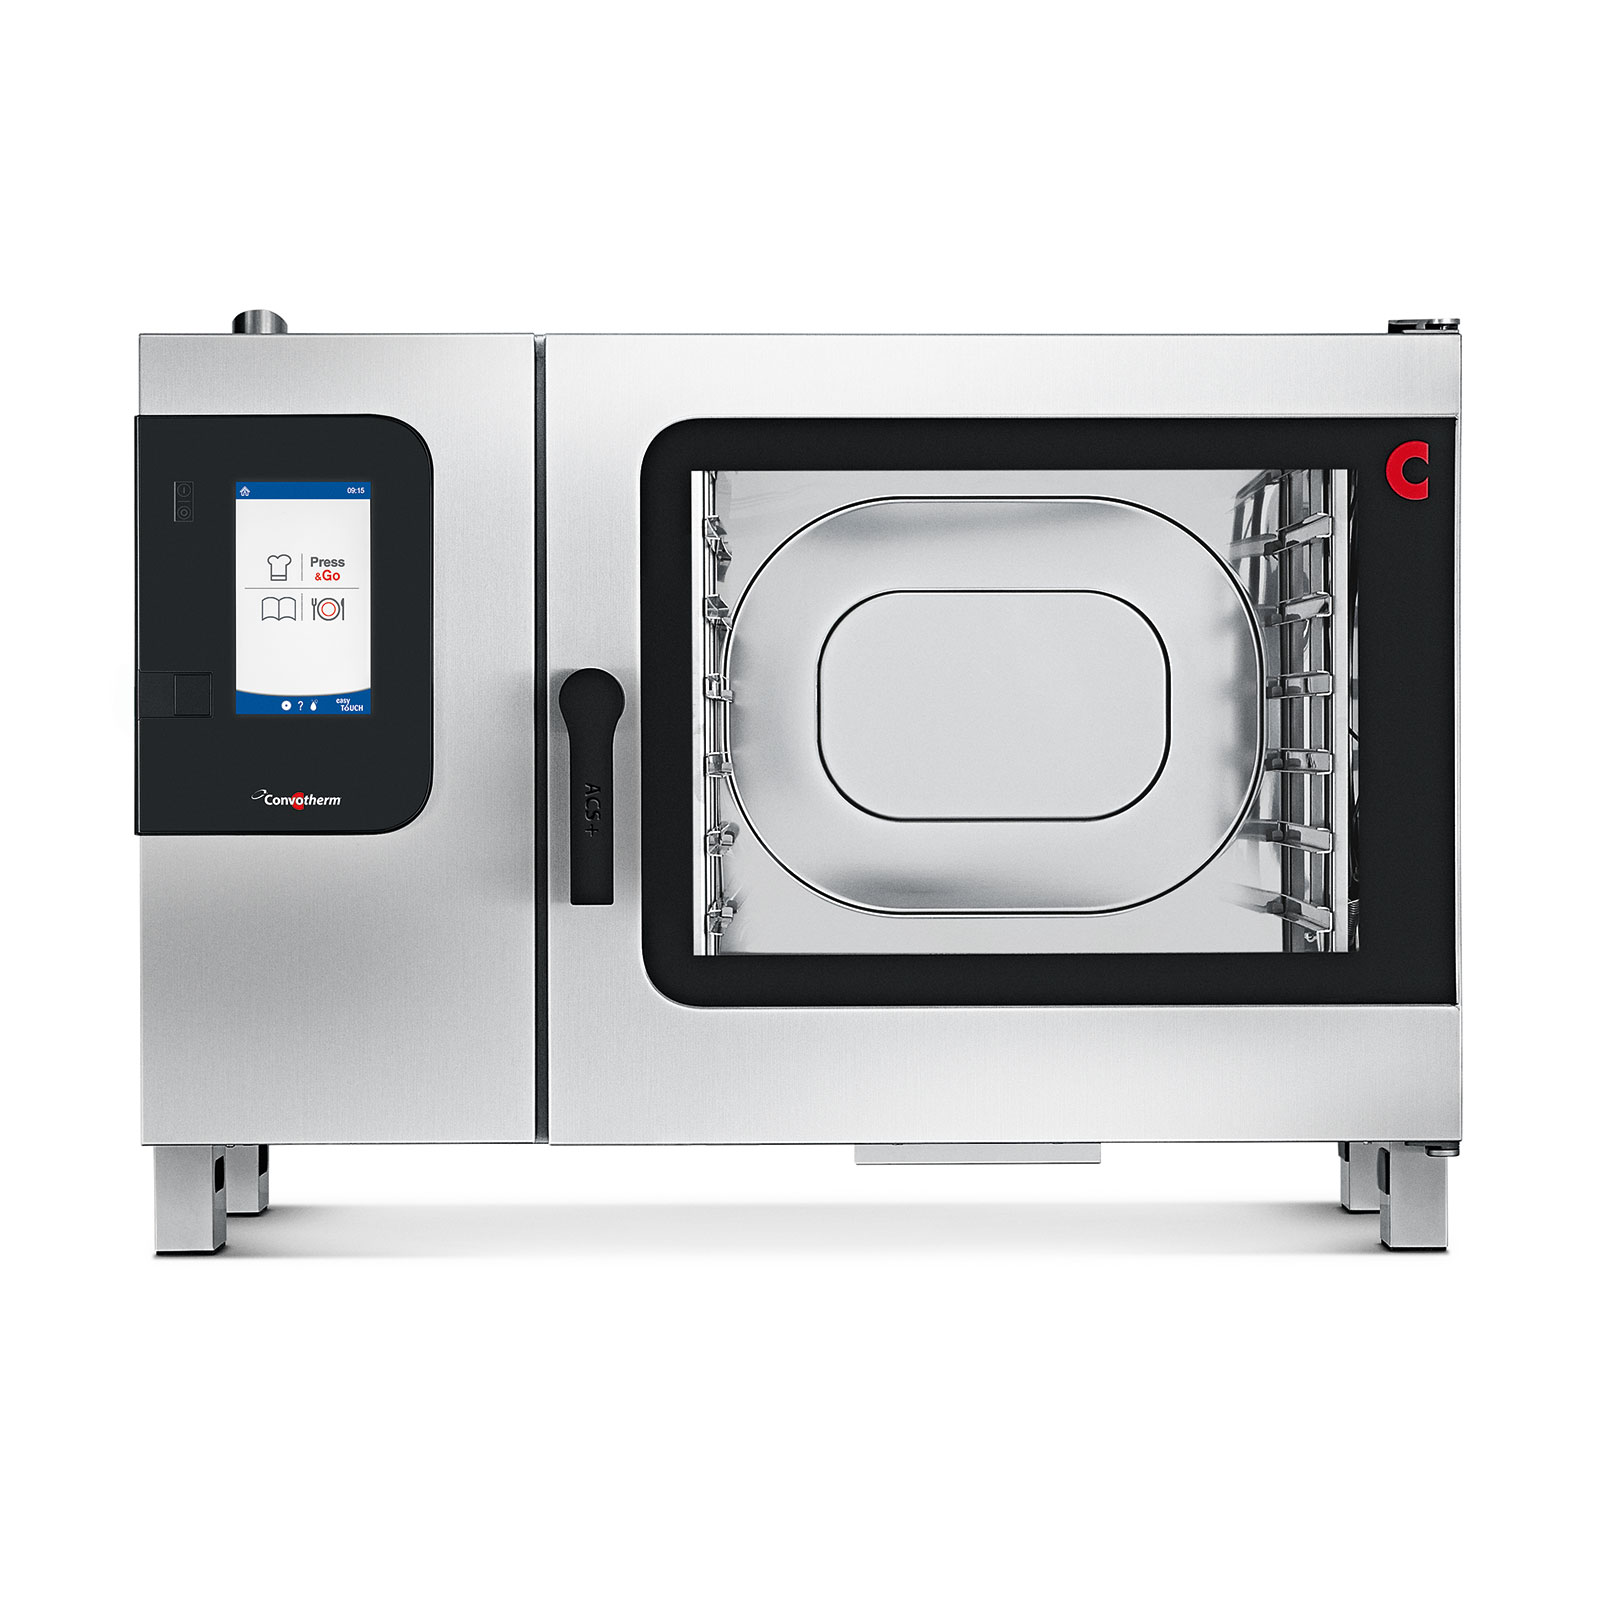 Convotherm C4ET6.20ES RH Full-Size Electric Combi Oven w/ Programmable Controls, Boilerless, 208-240v